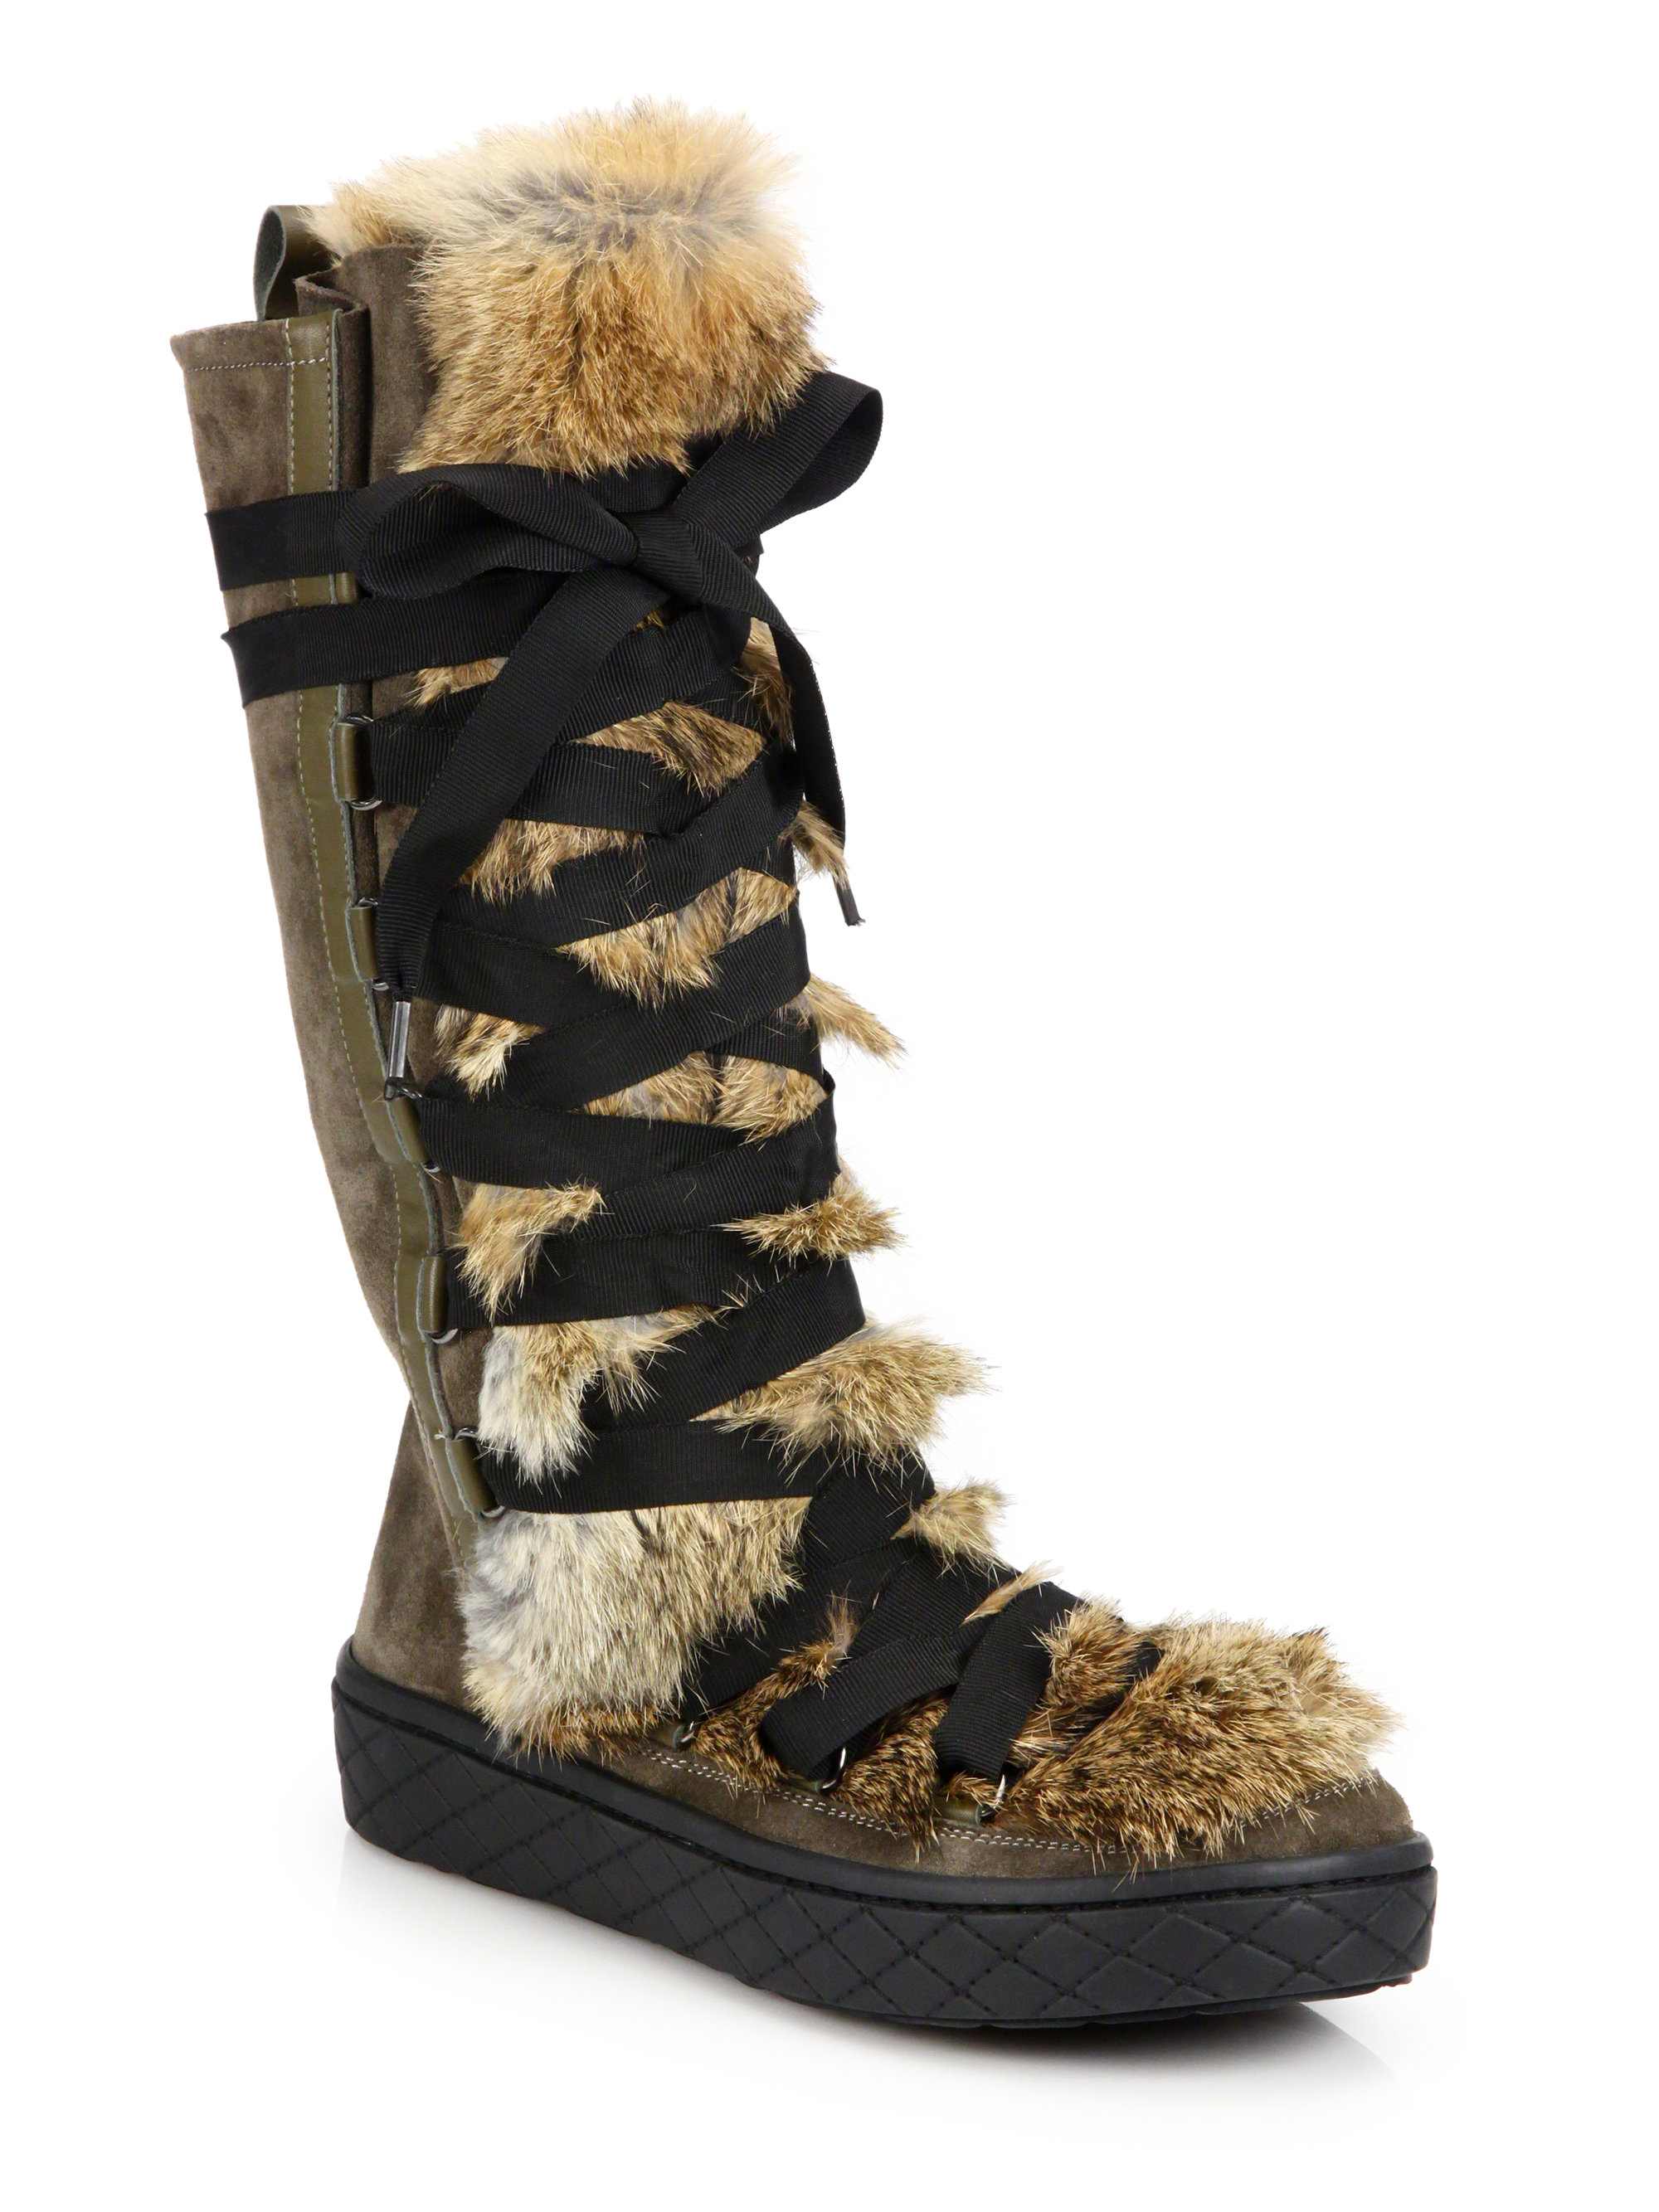 Lyst - Moncler Zoelie Rabbit Fur, Leather and Suede Boots 